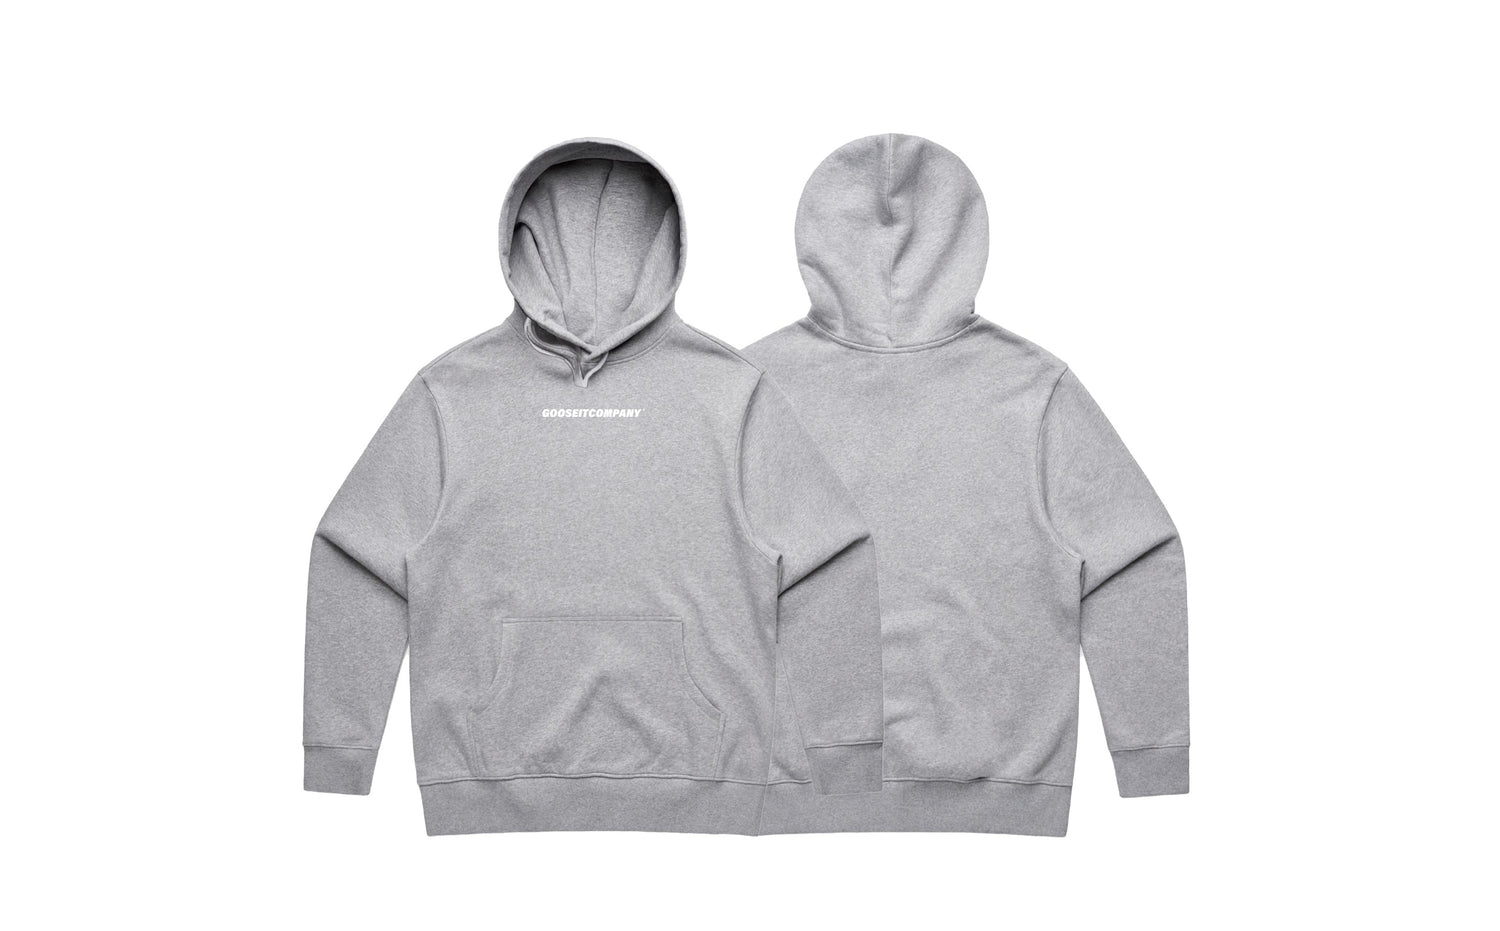 Fundamental Heather Lacrosse Hoodie - Front and back